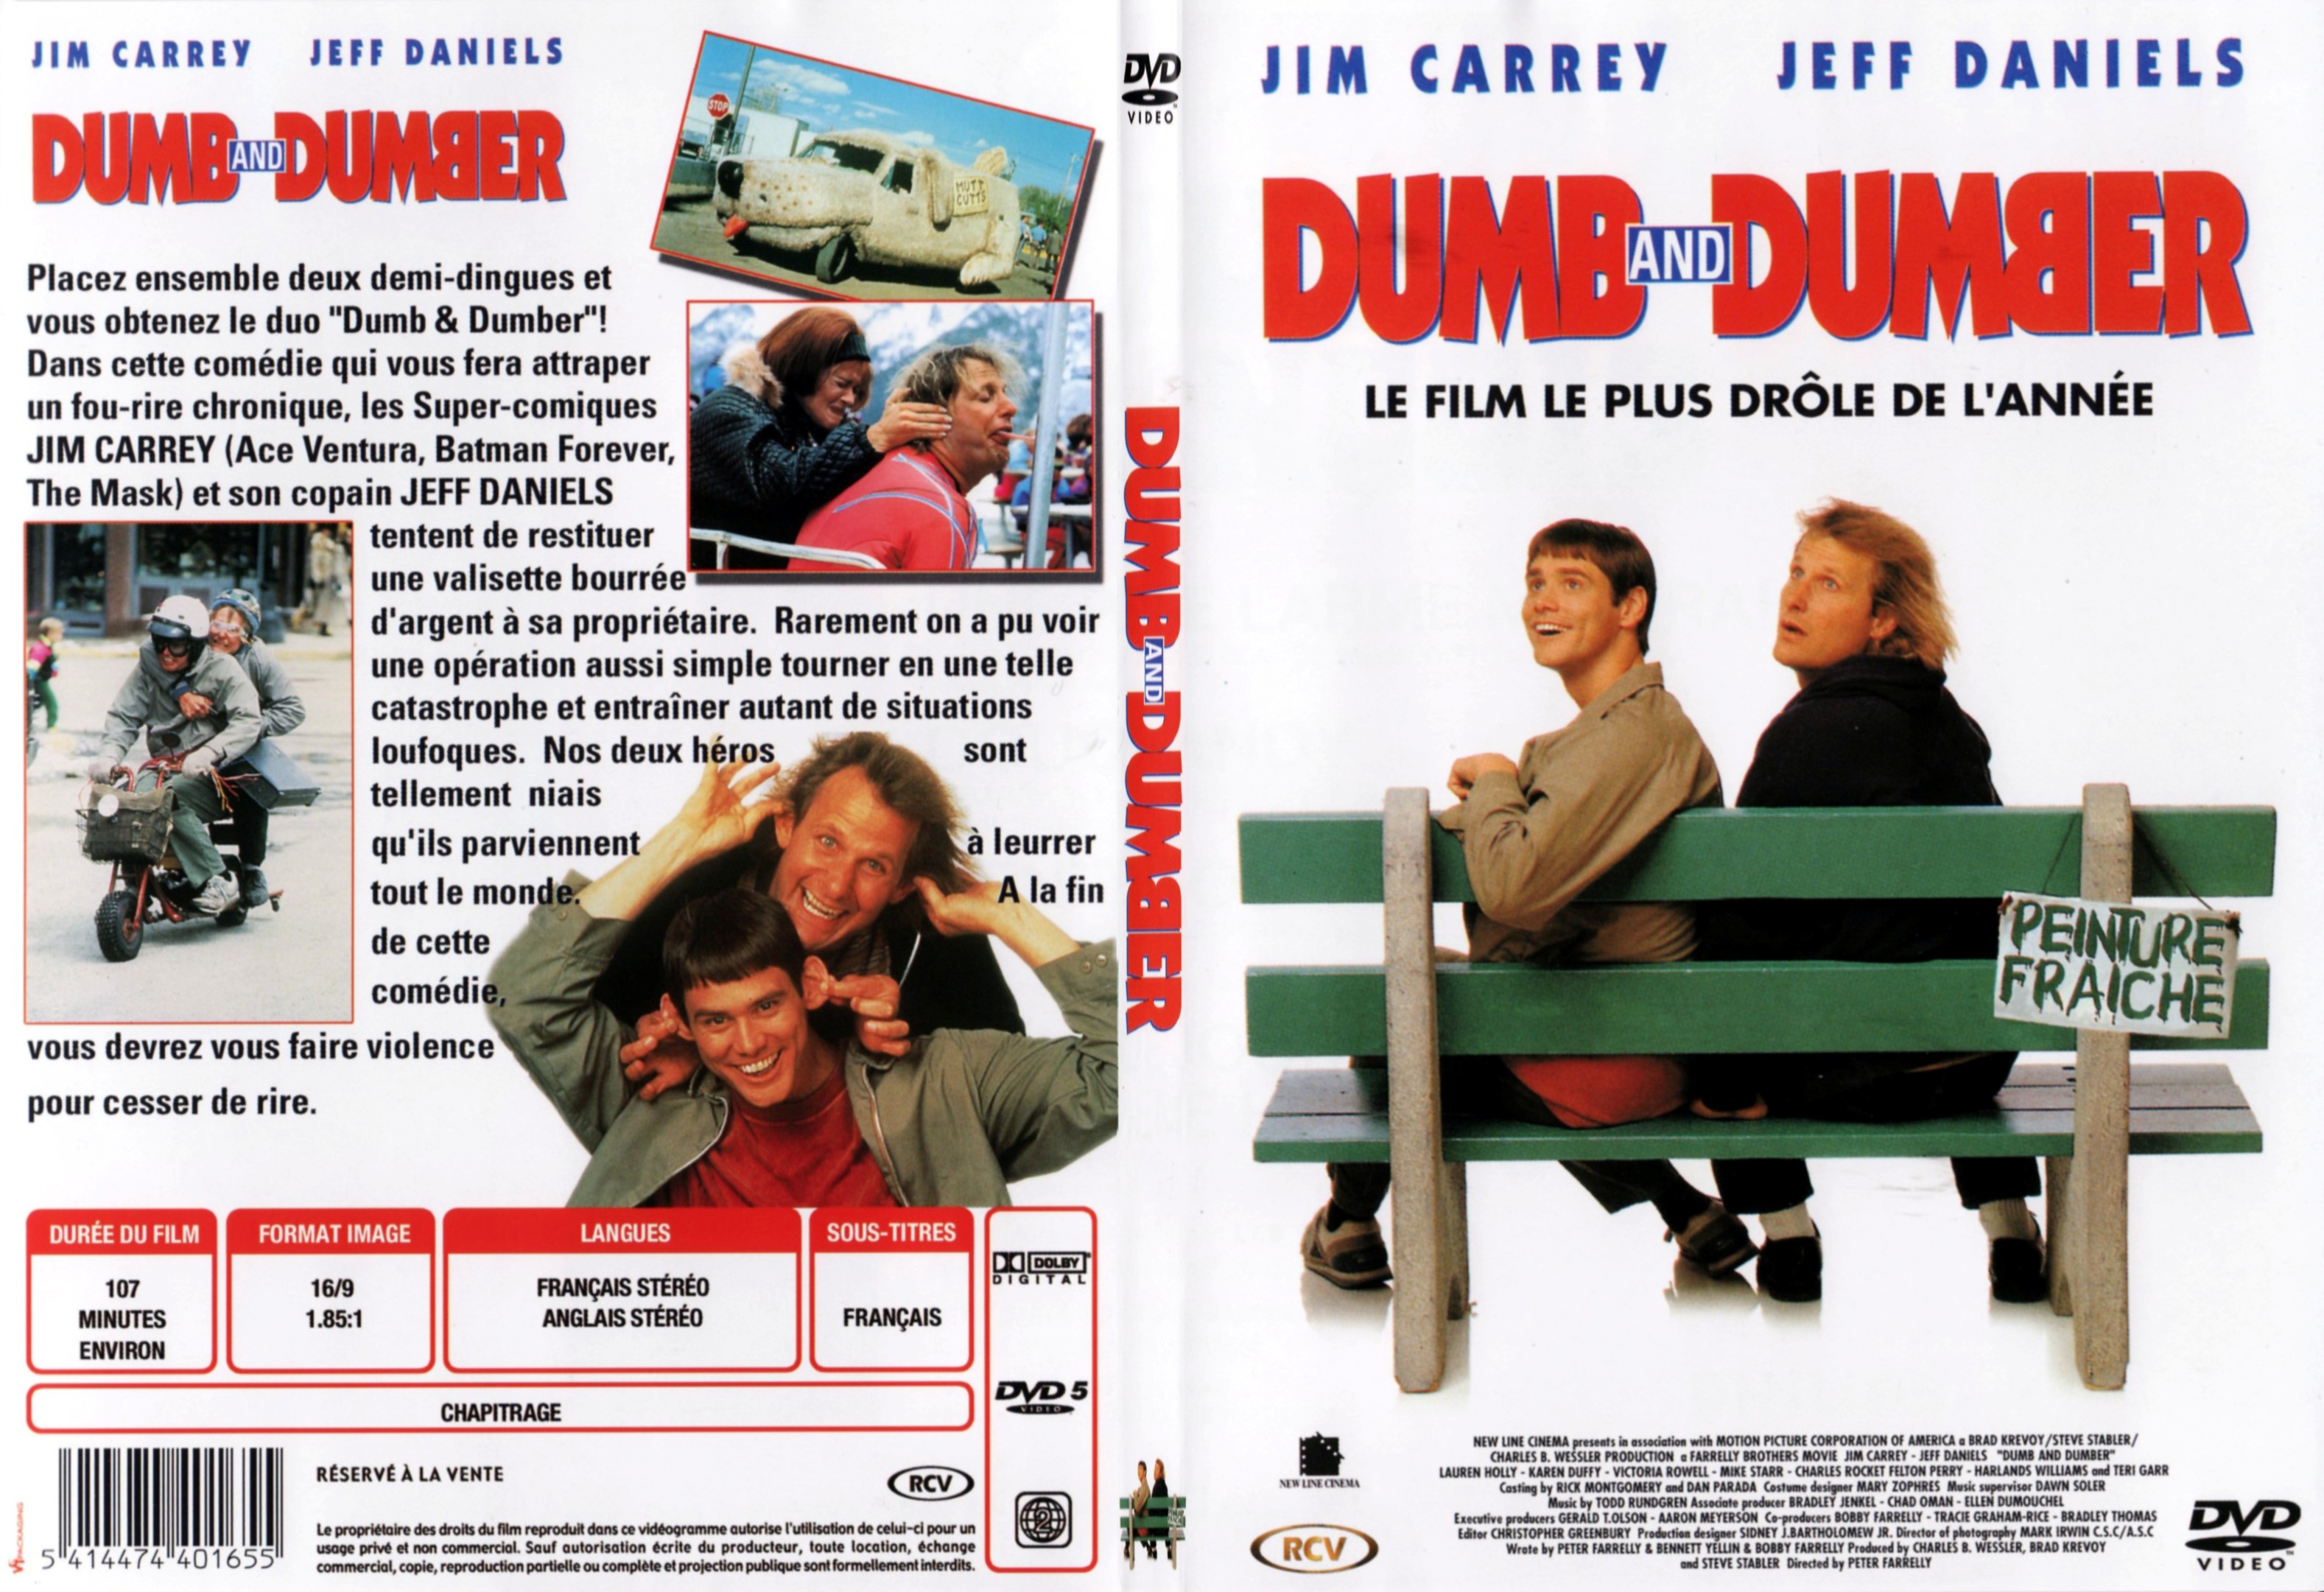 Jaquette DVD Dund and dumber - SLIM